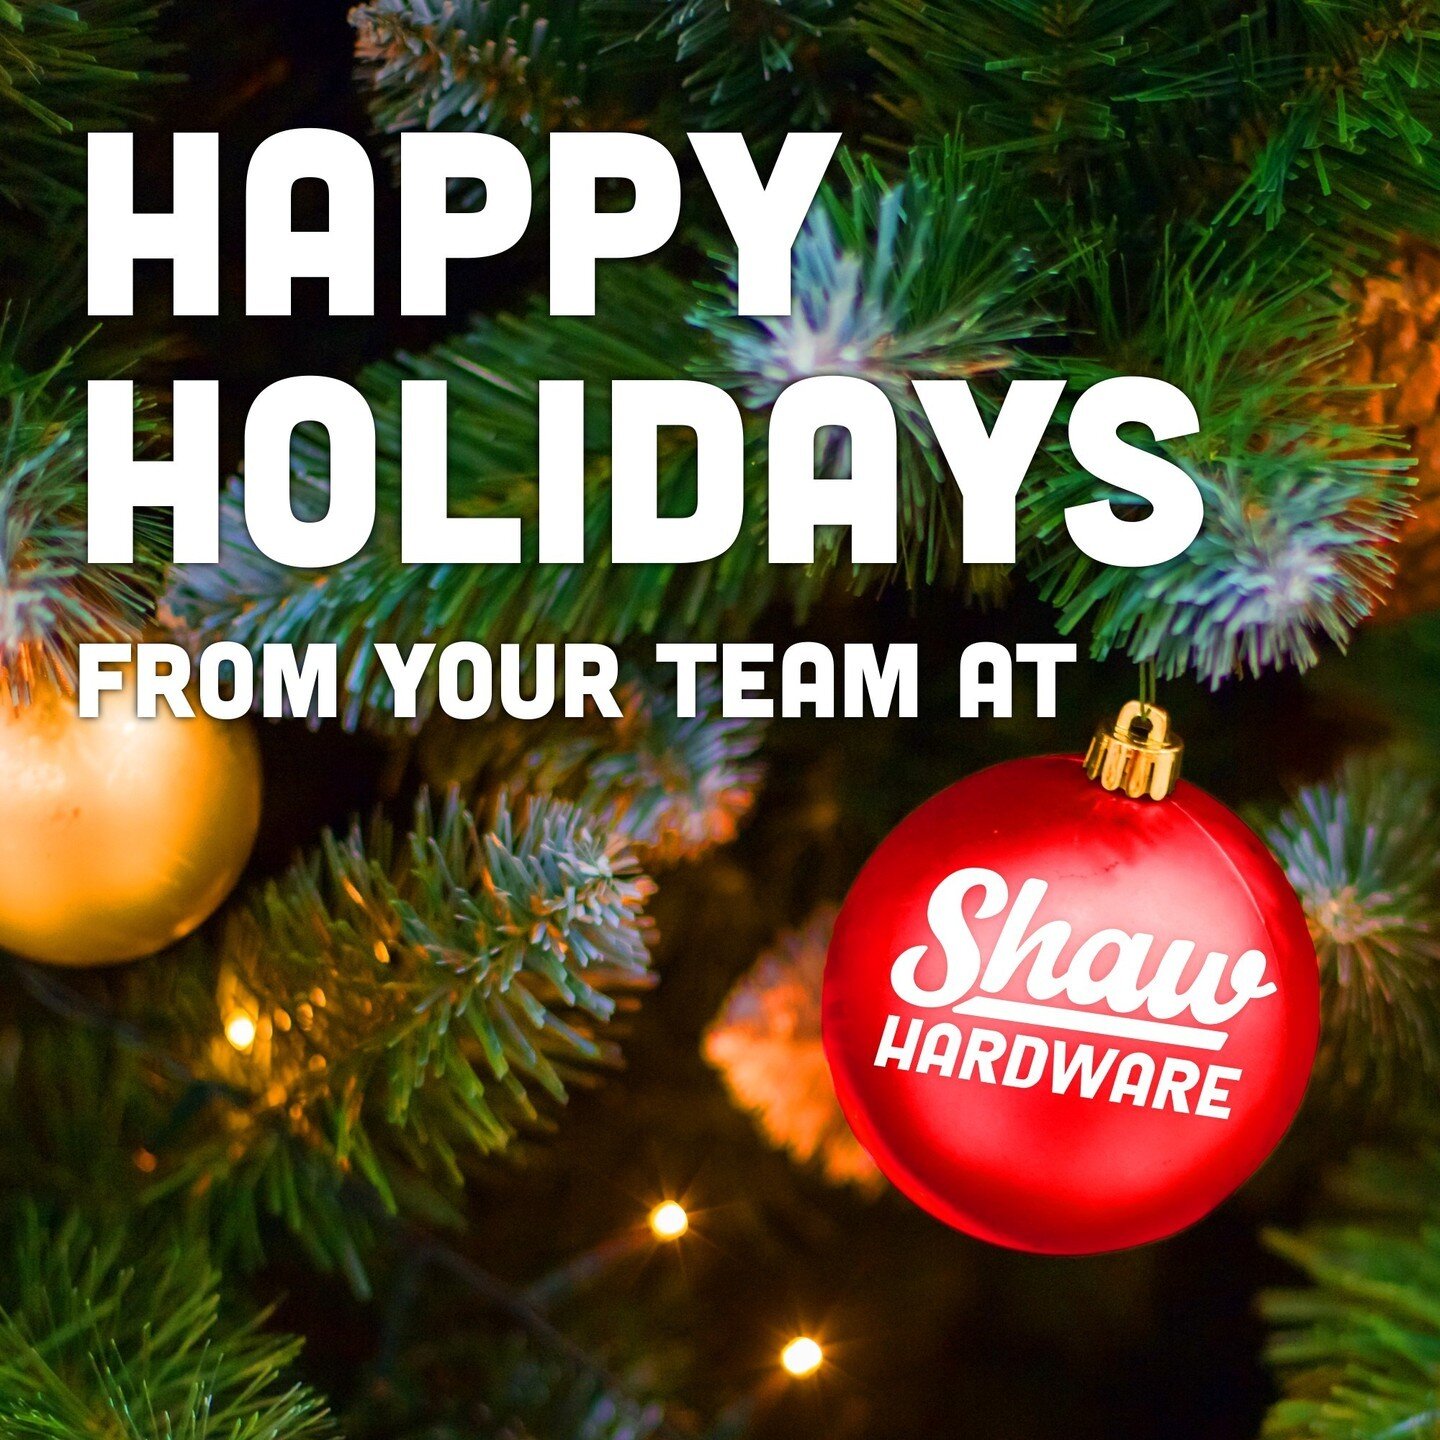 We hope you have a fun and festive holiday with your family and friends!